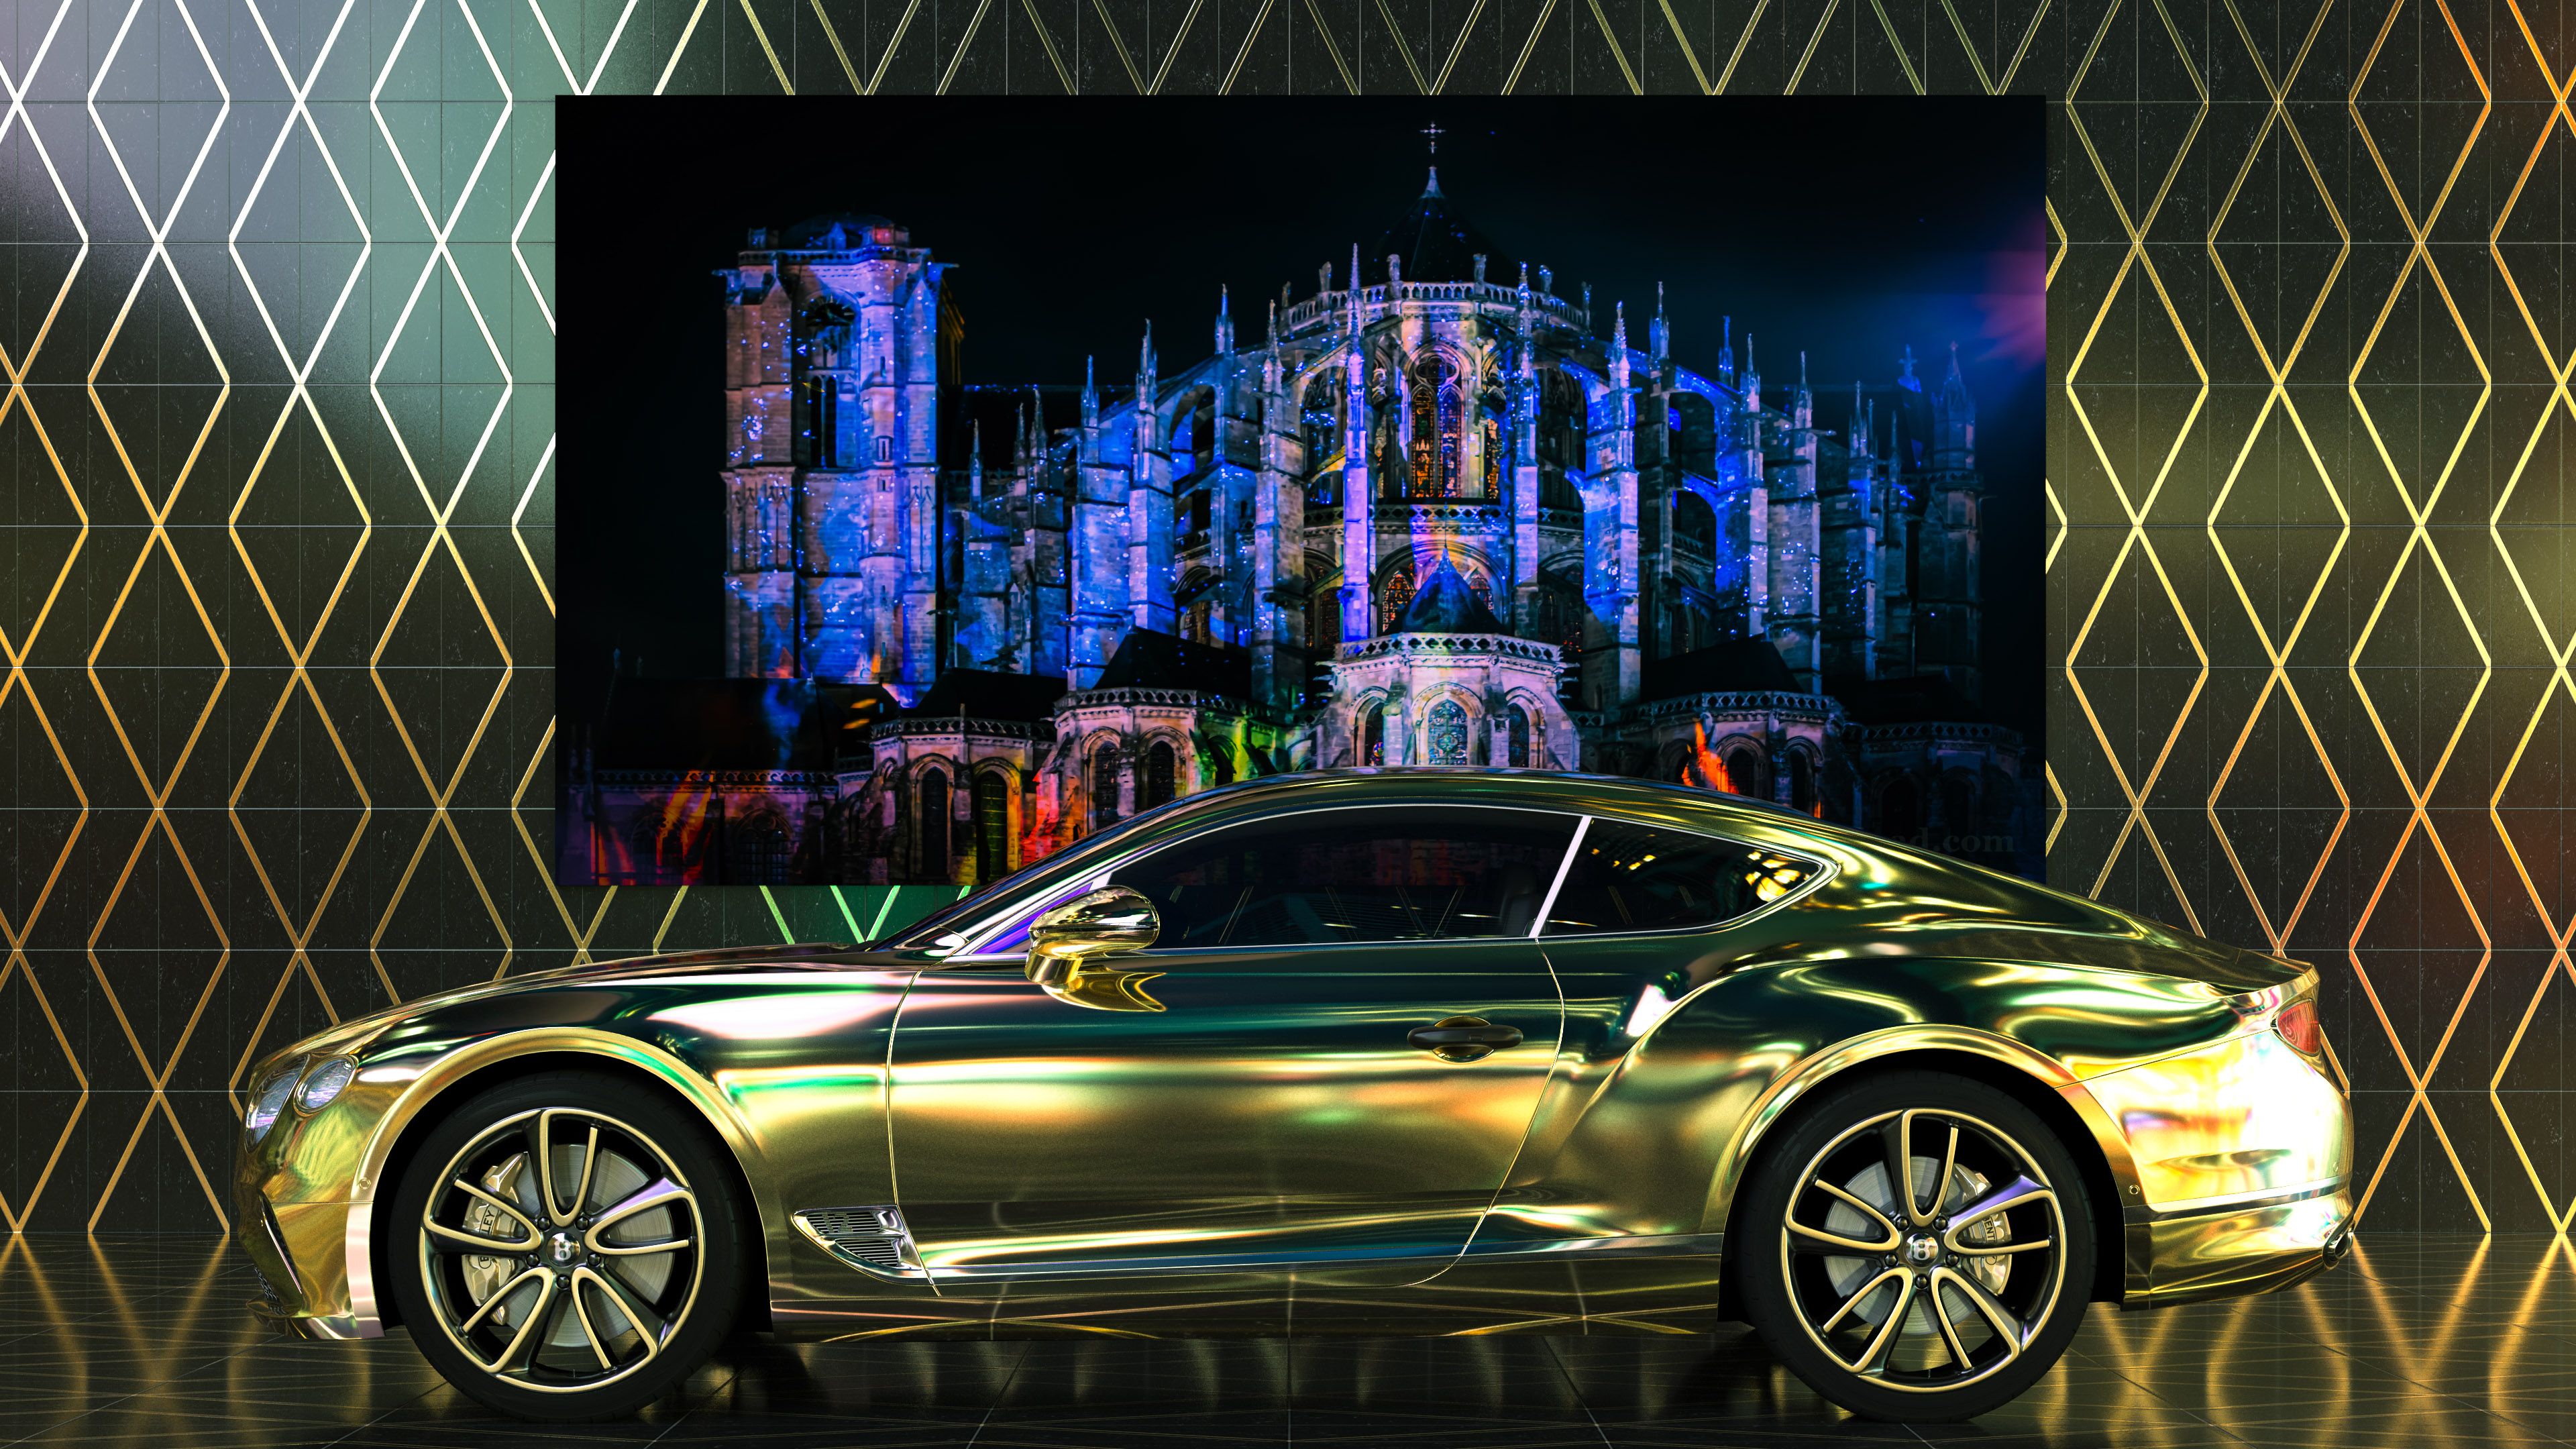 Dive into the world of luxury with our cool car wallpaper featuring the gold Bentley Continental GT, a symbol of British craftsmanship.